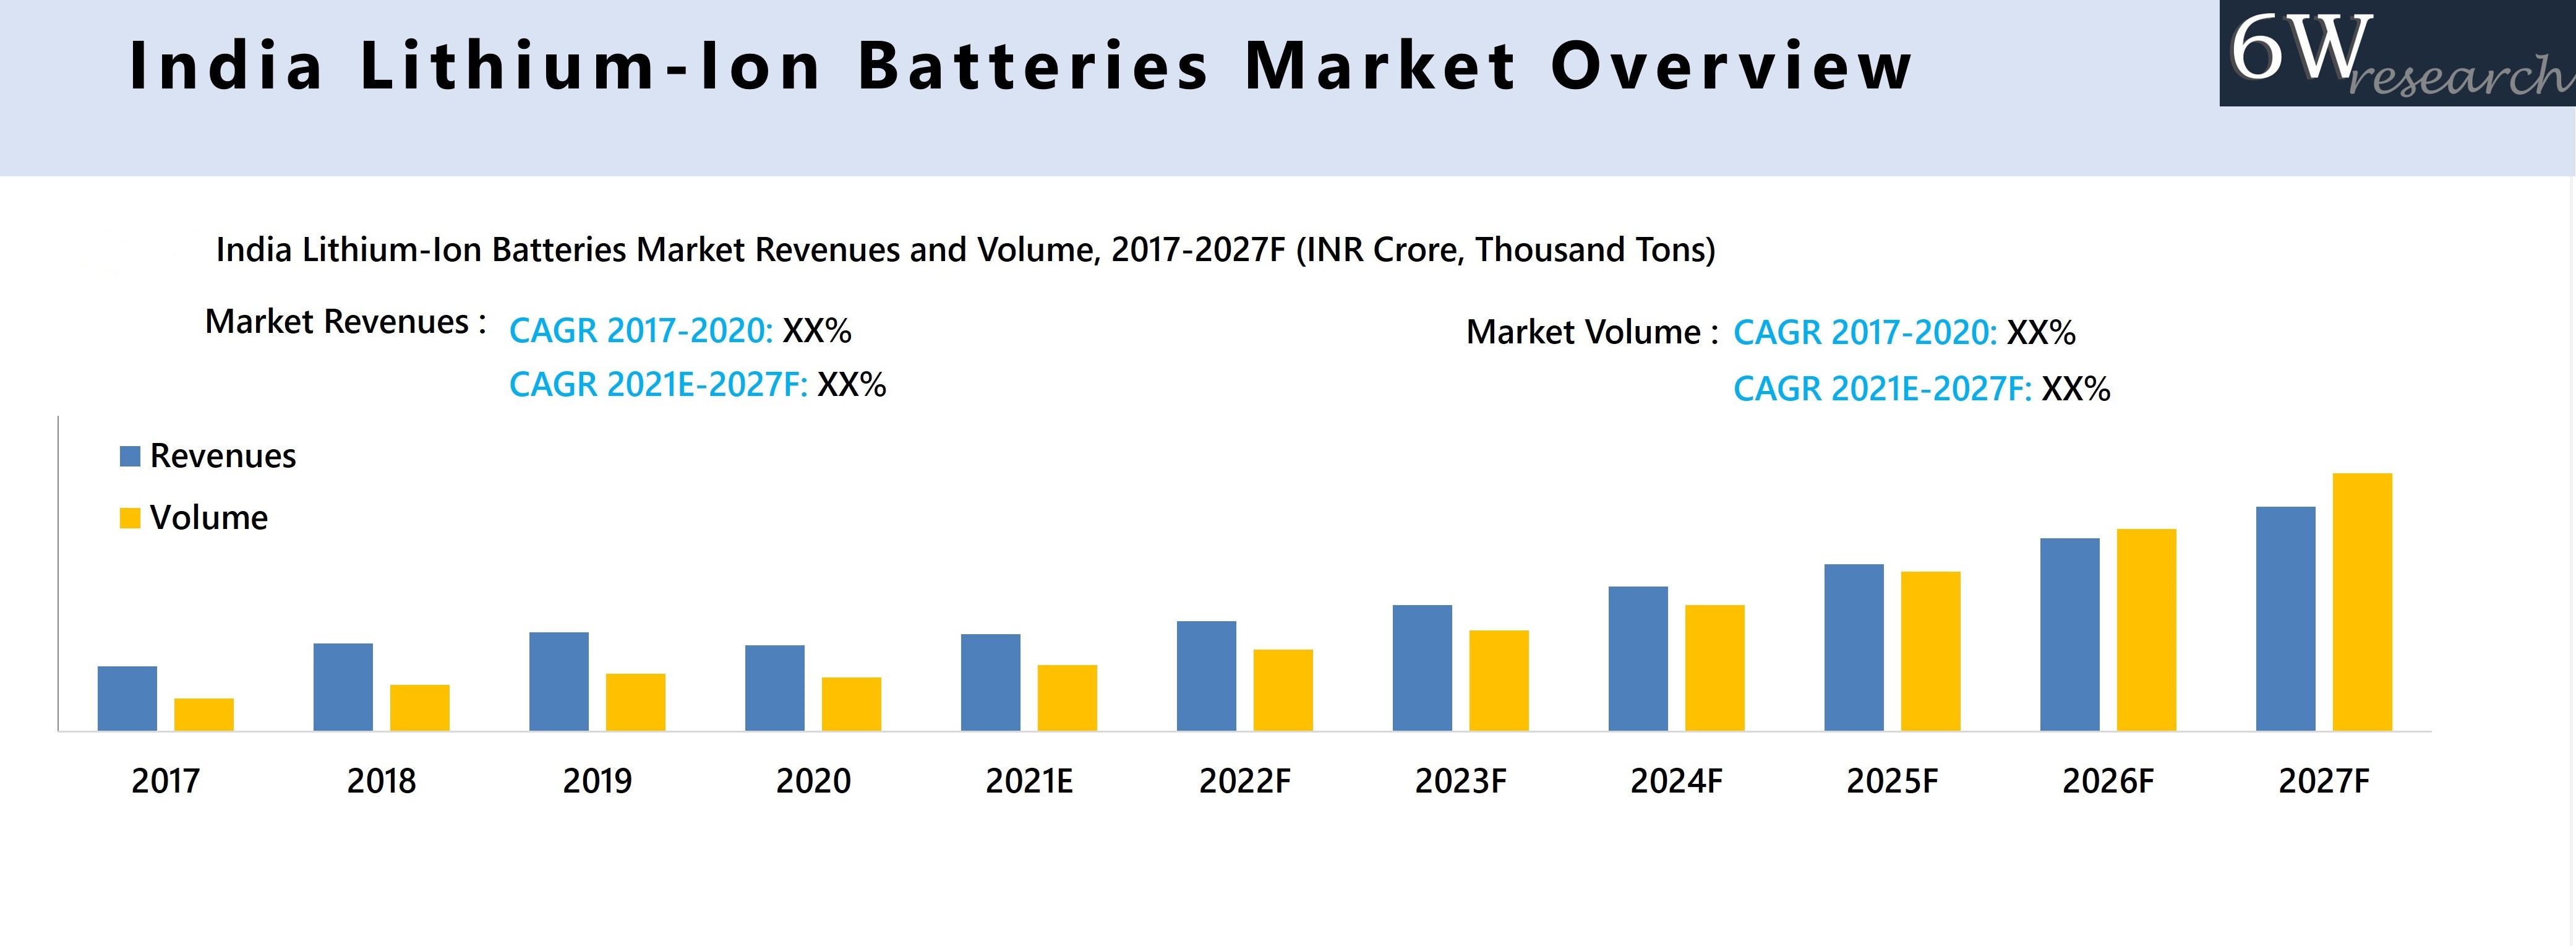 India Lithium-Ion Batteries Market Overview